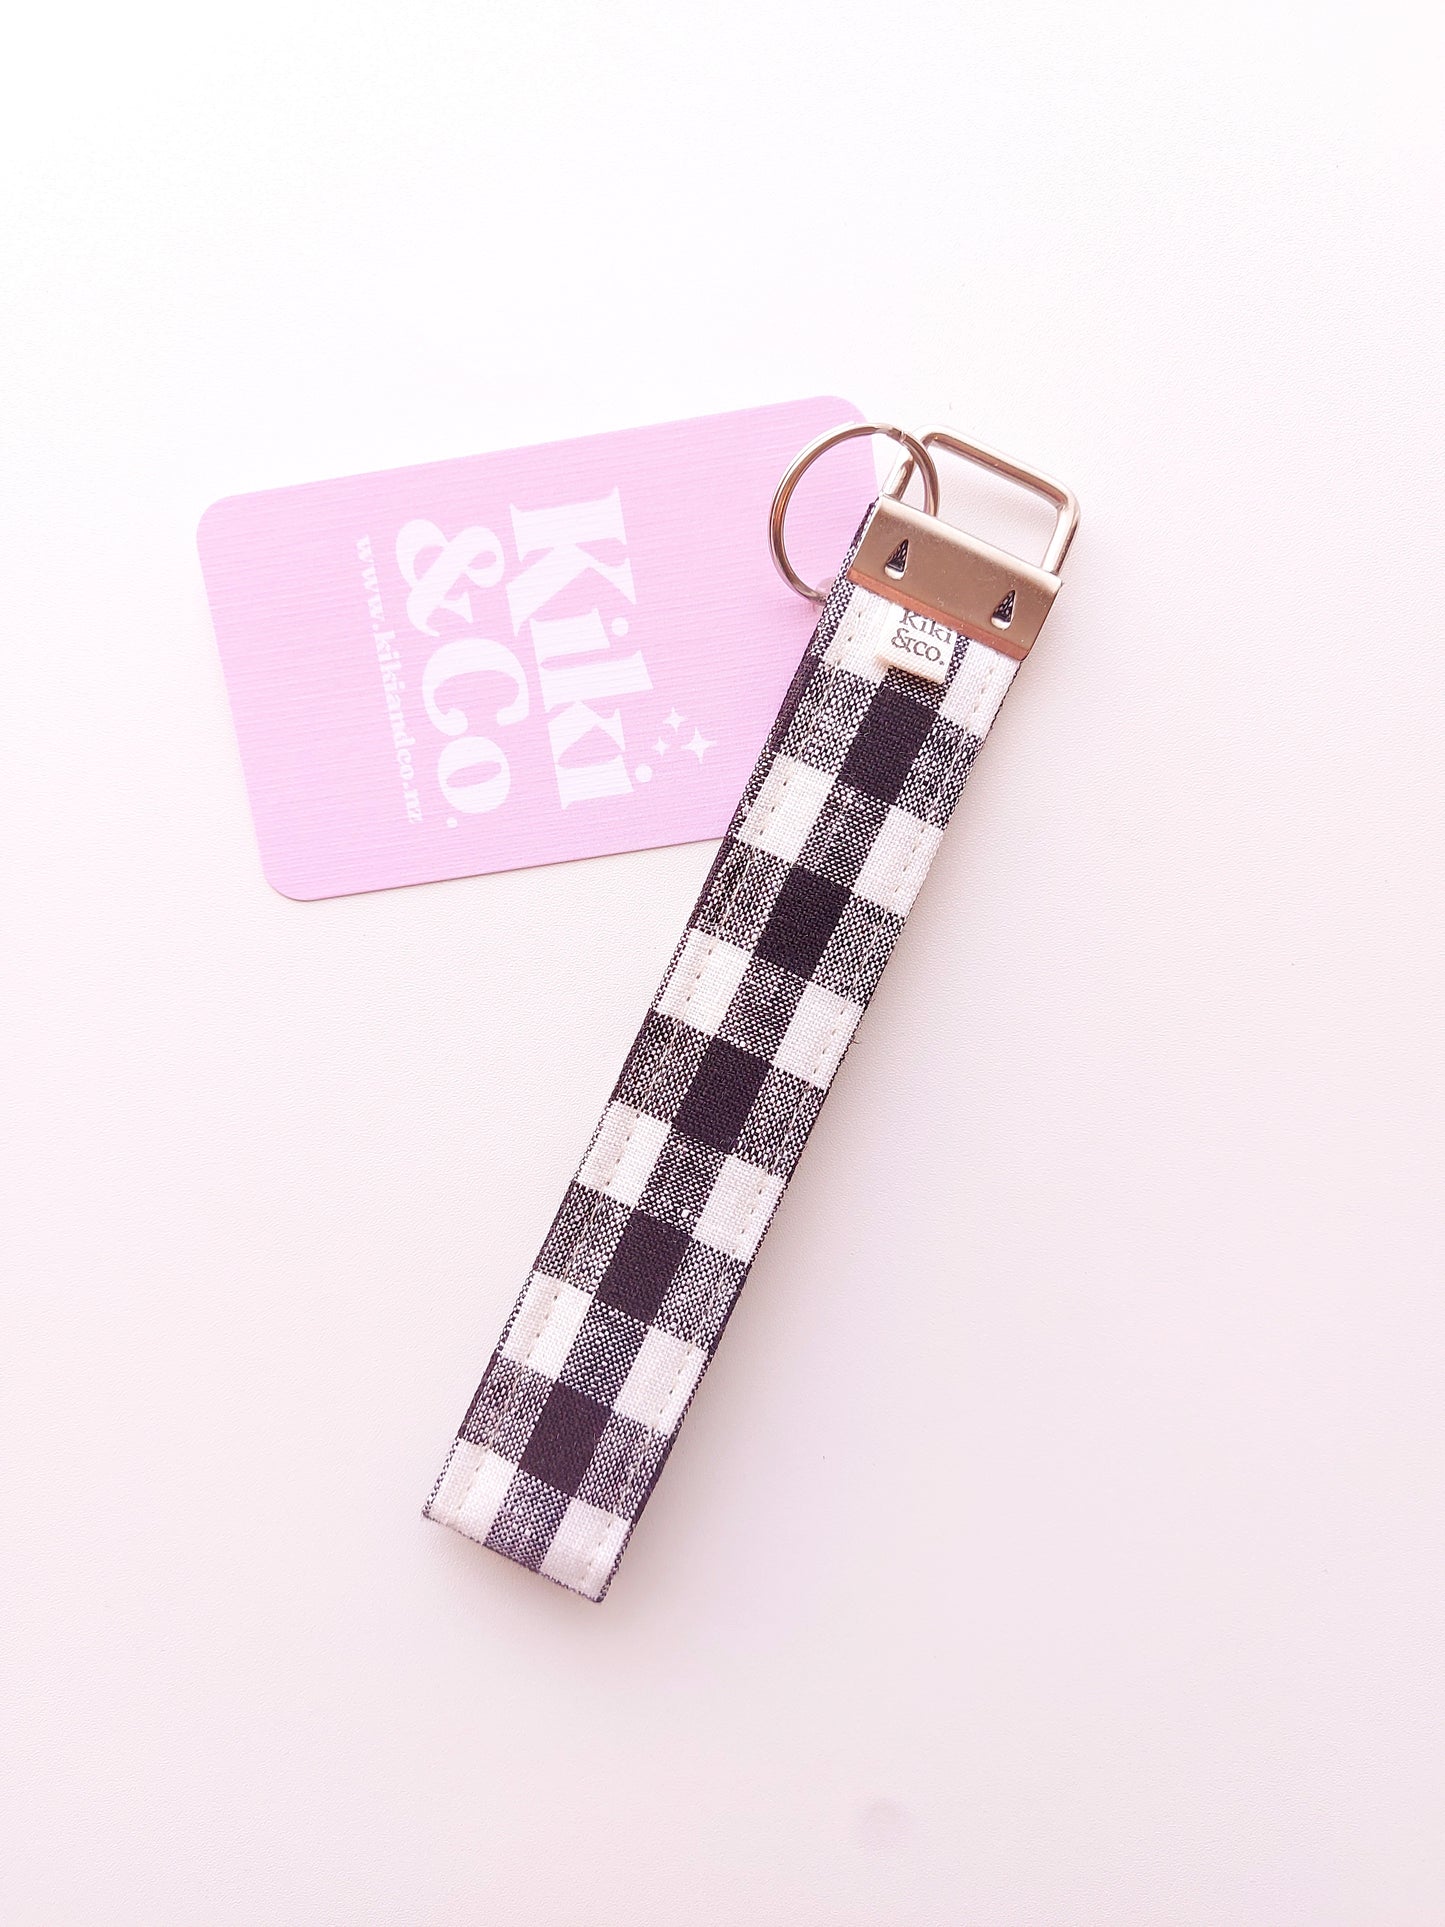 Keychain - Black and White Gingham Linen